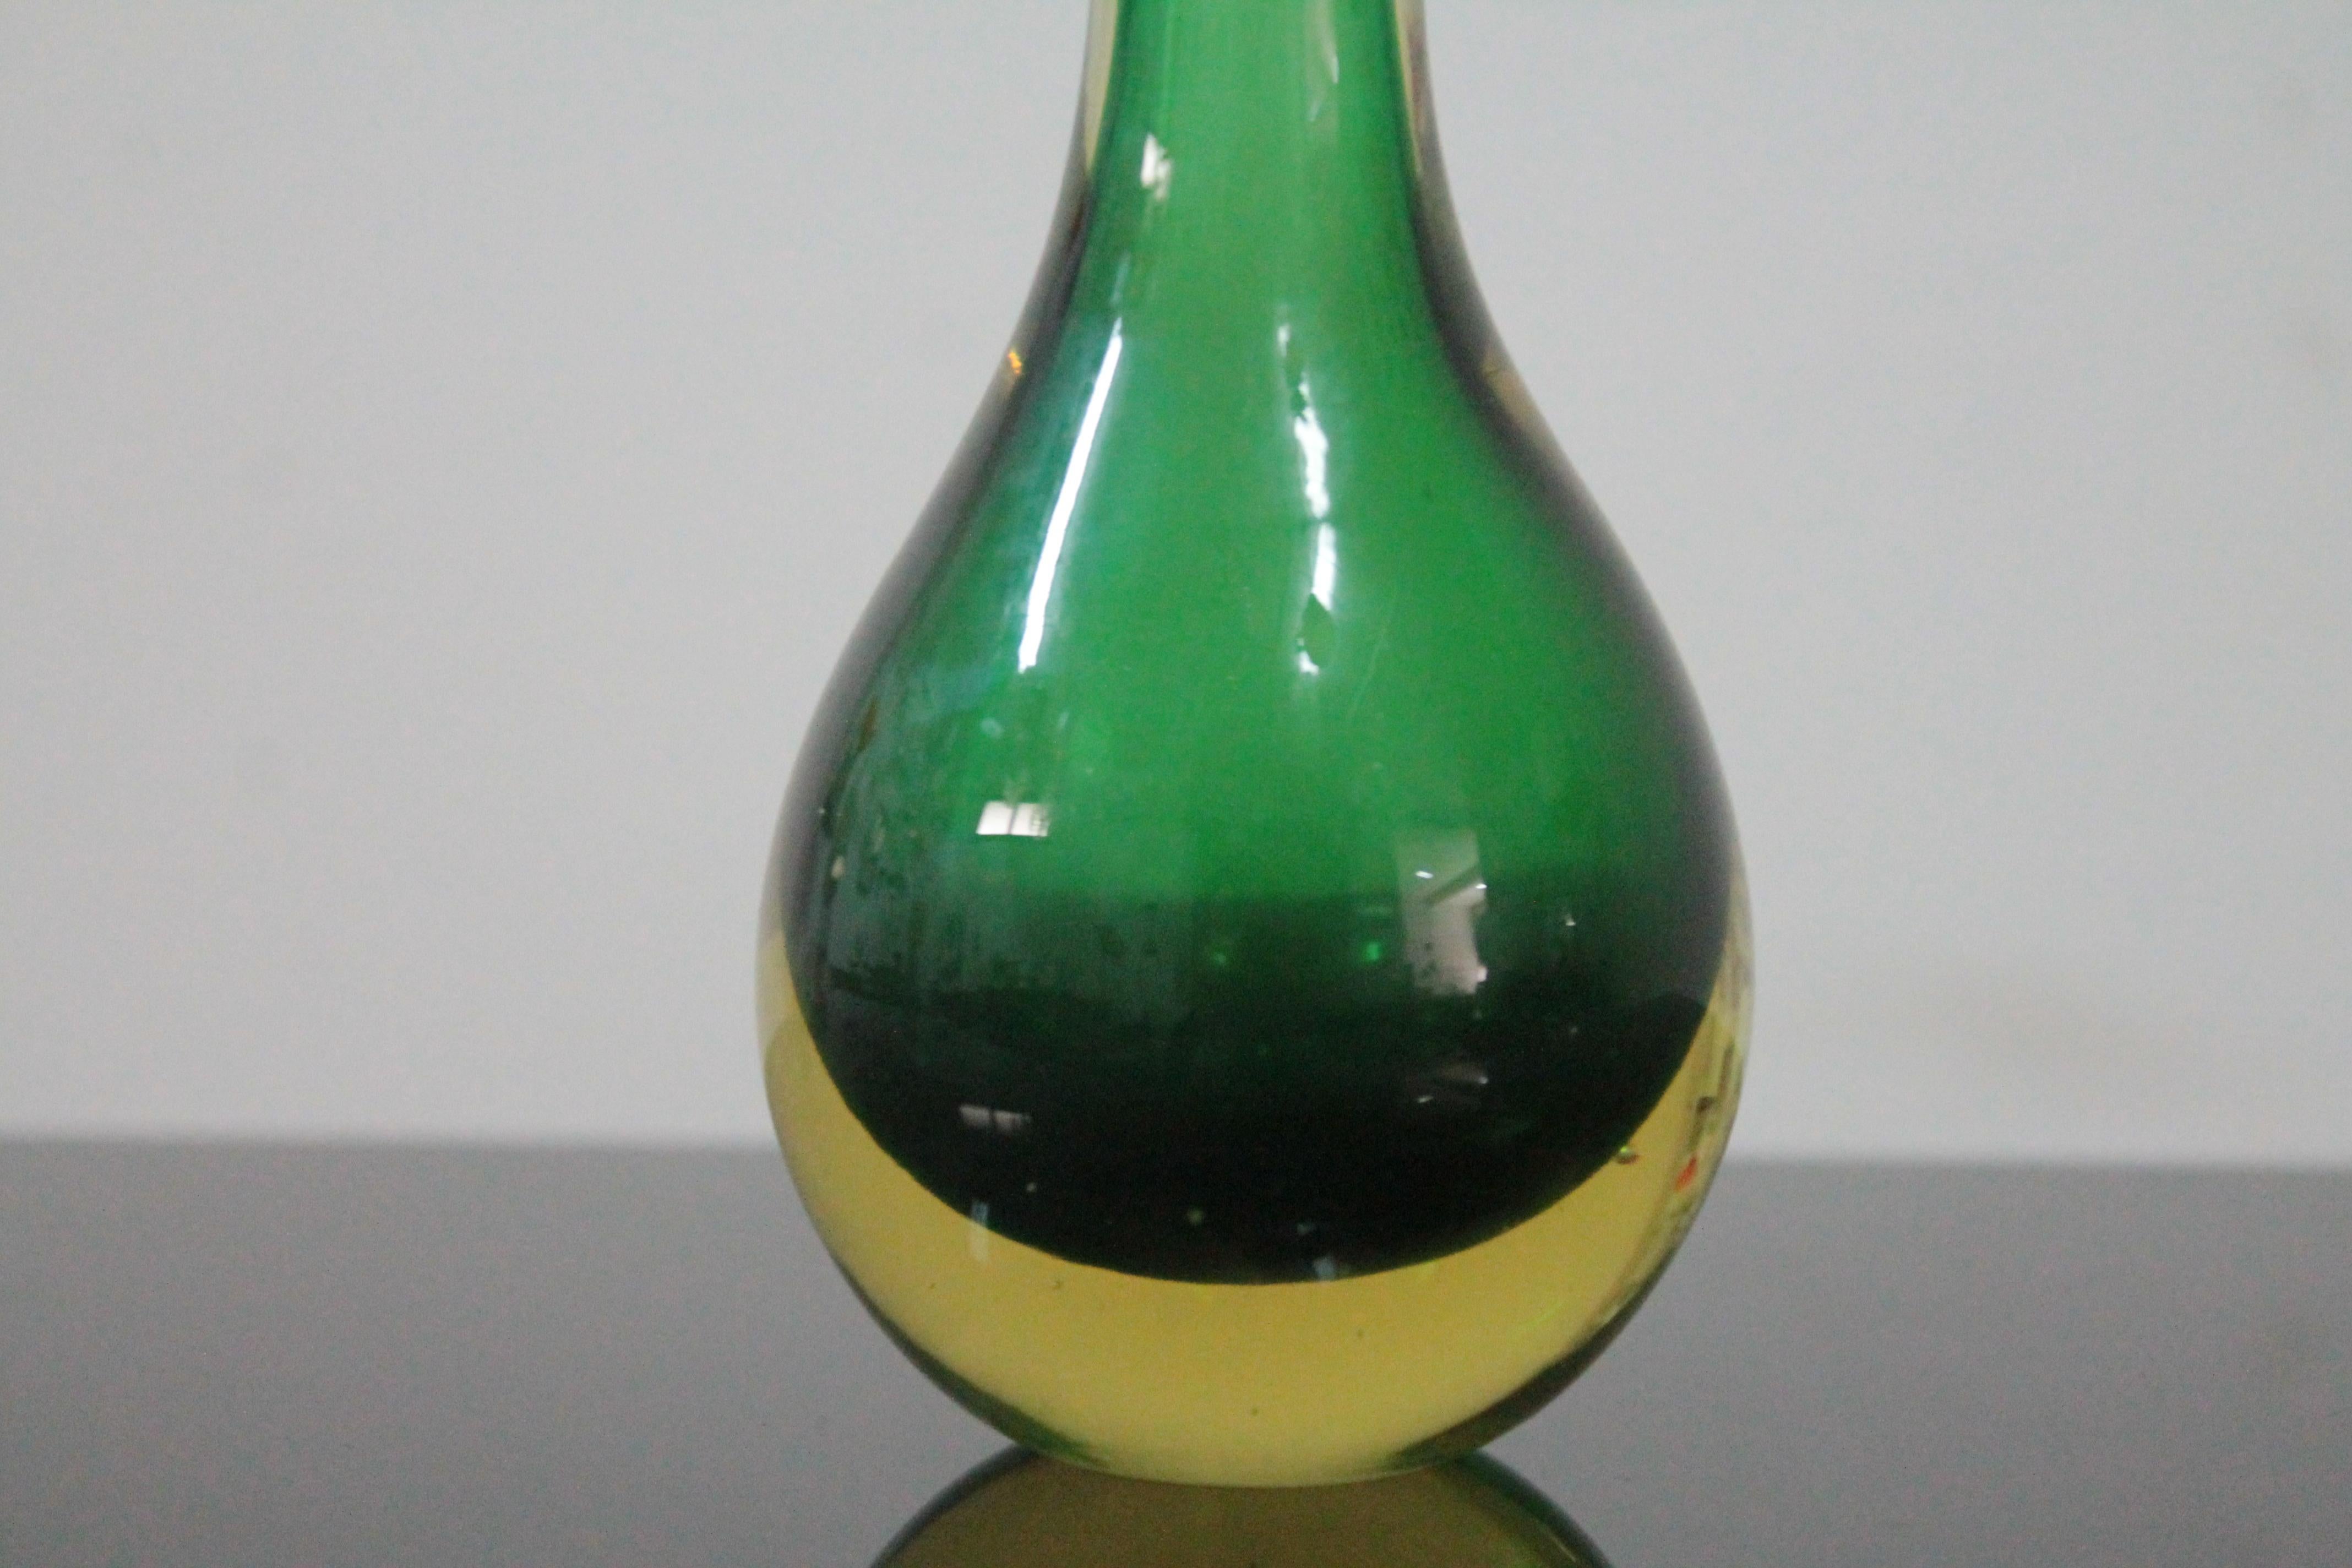 Elegant single flower vase by Seguso made in Italy, circa 1970.
Good condition.